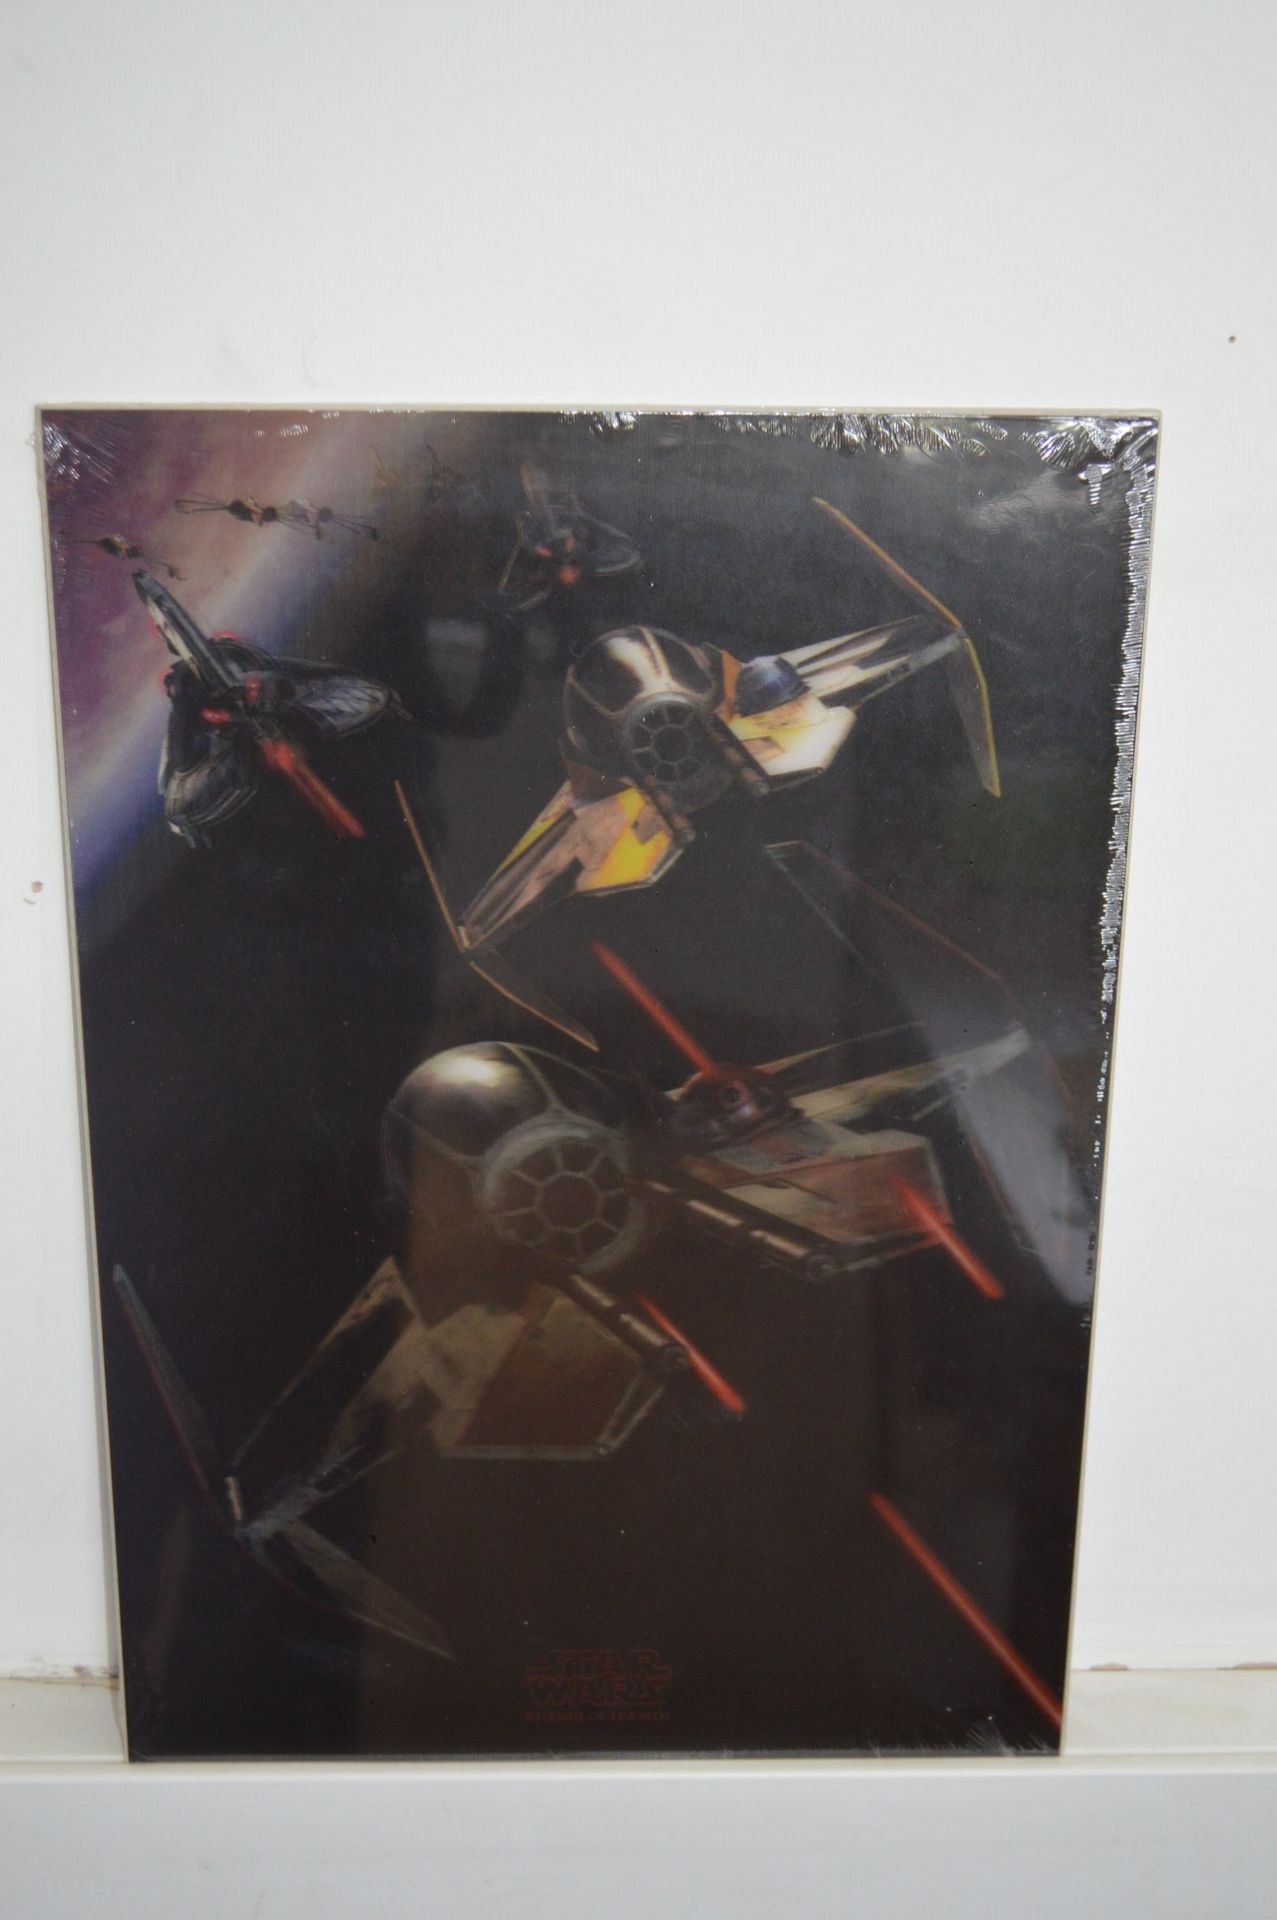 LIMITED EDITION STAR WARS 3D LITHOGRAPHIC PRINT WITH CERTIFICATE OF AUTHENTICITY